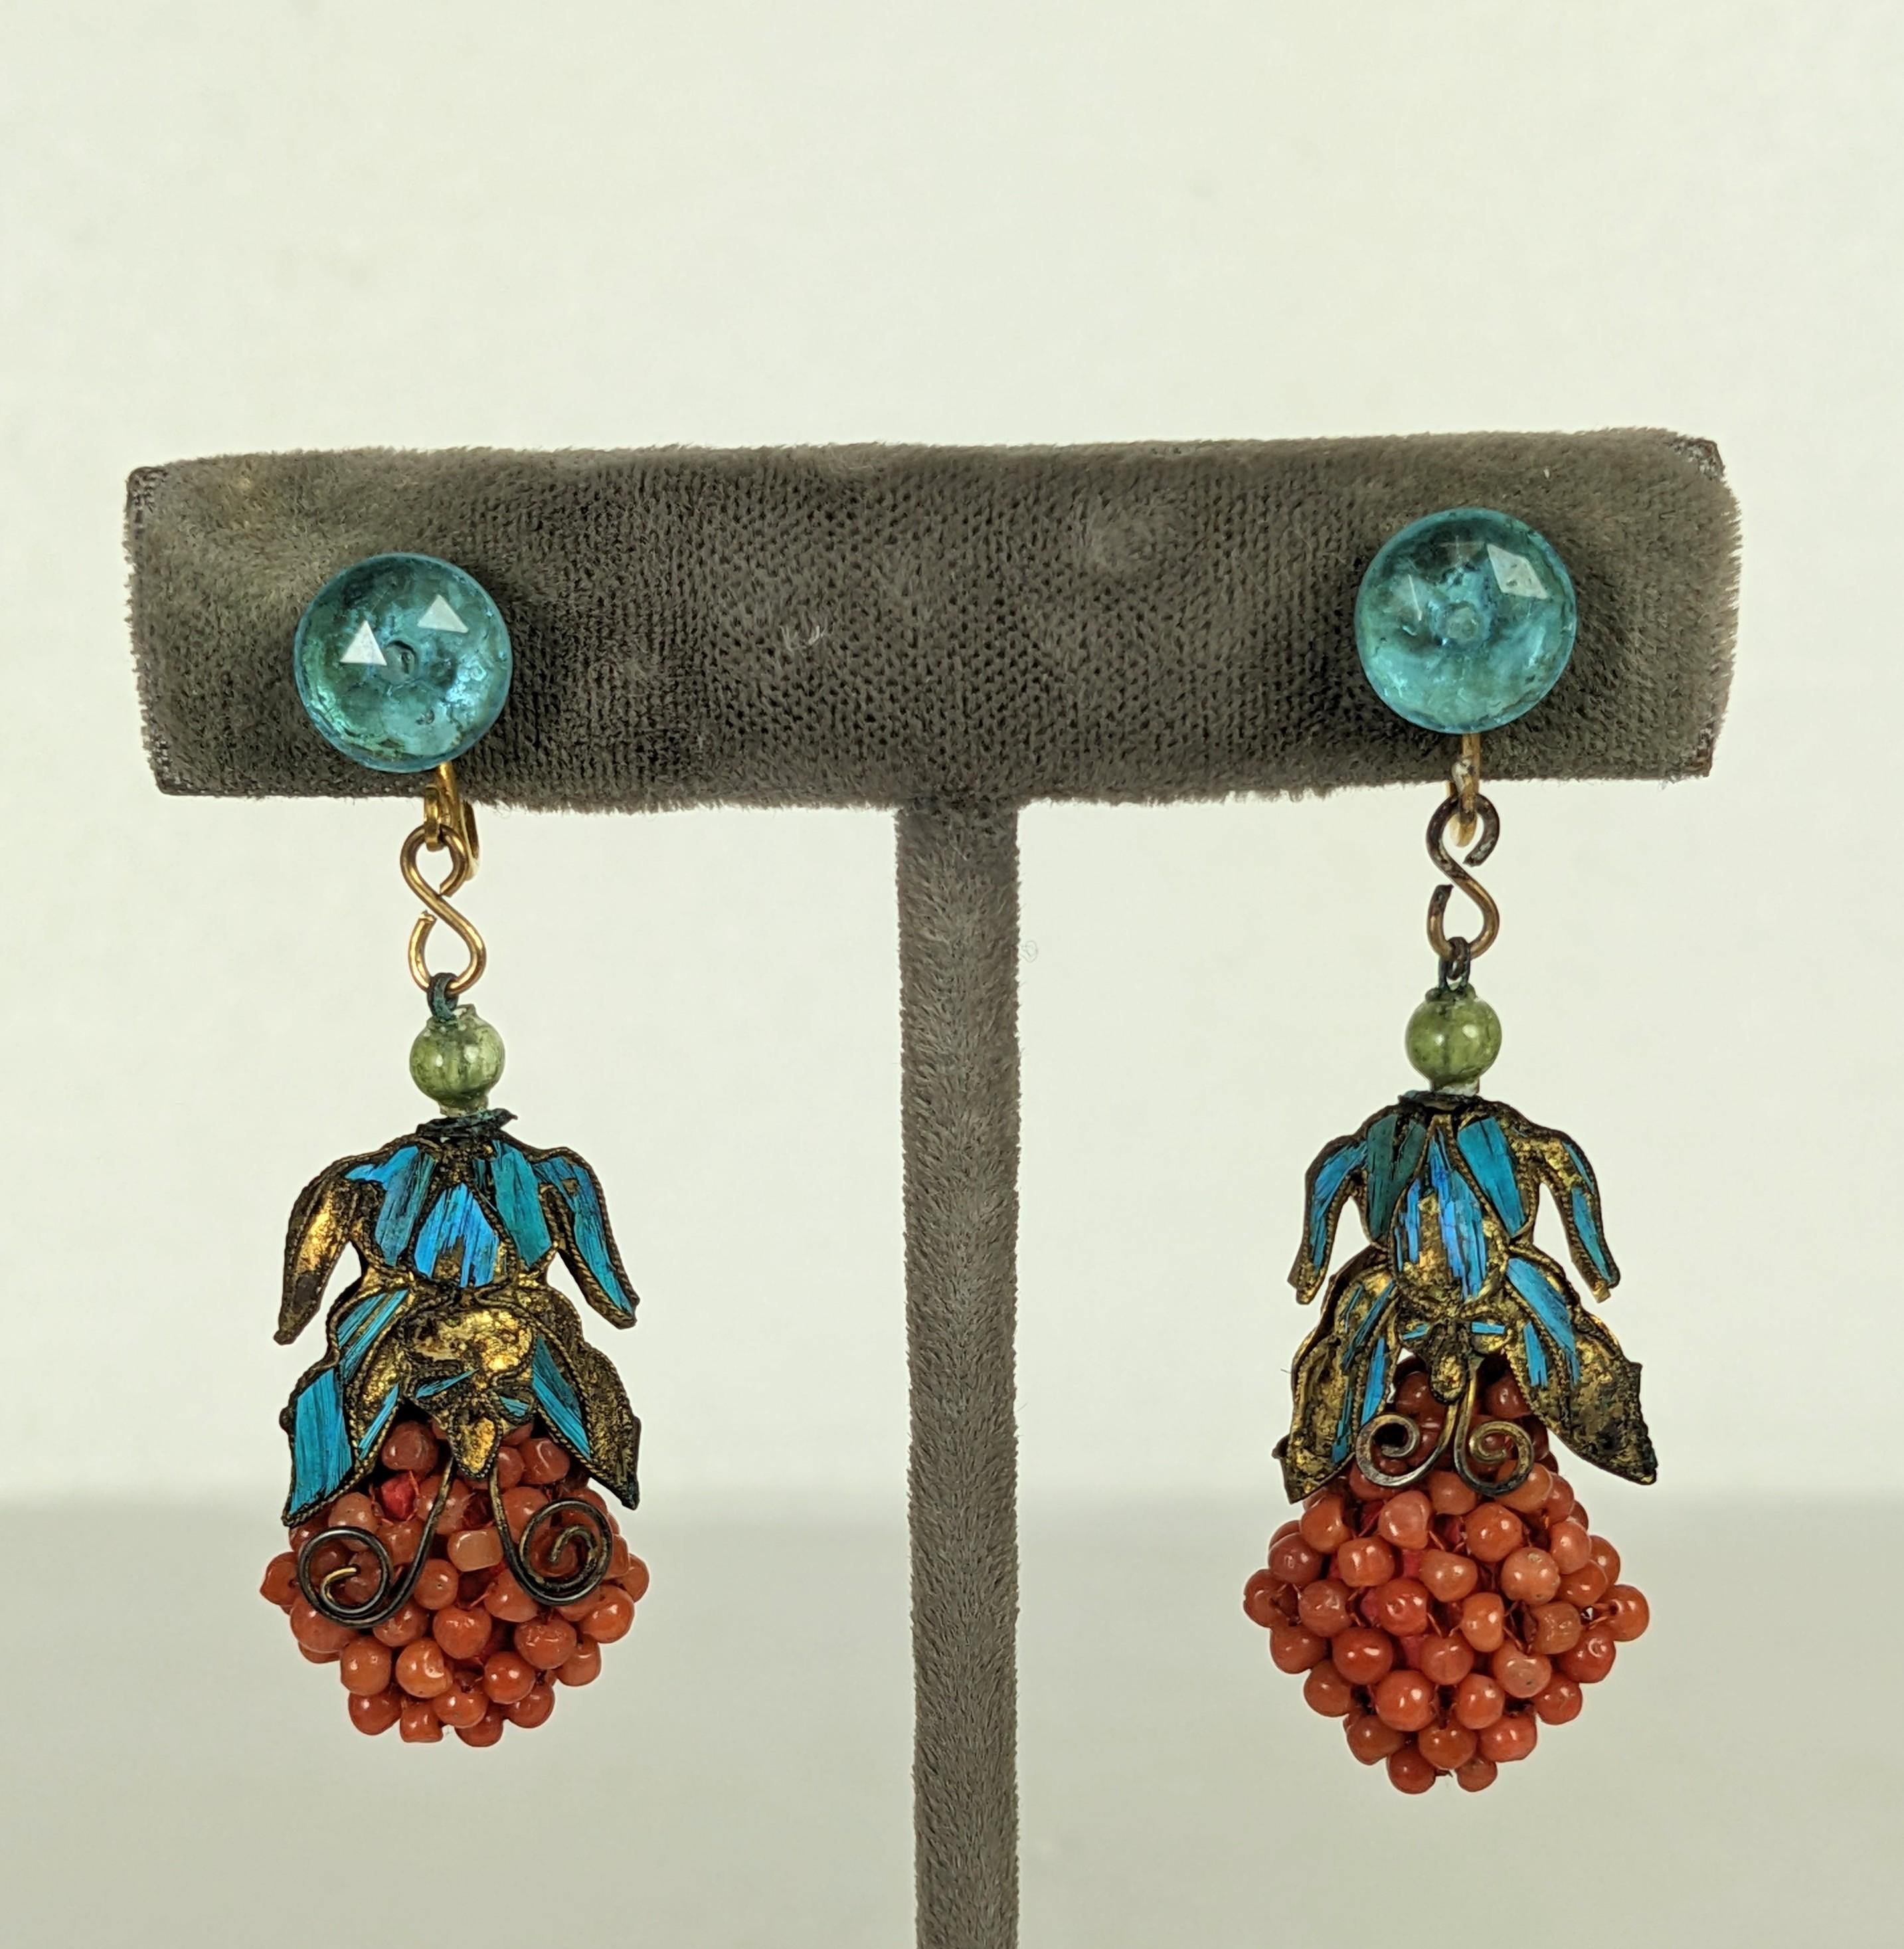 Striking Chinese Coral and Kingfisher Feather Deco Drop Earrings circa 1920's. An aquamarine crystal screw back earring has a drop of woven coral beads. The drop is capped with butterfly motifs set with kingfisher feathers in that brilliant